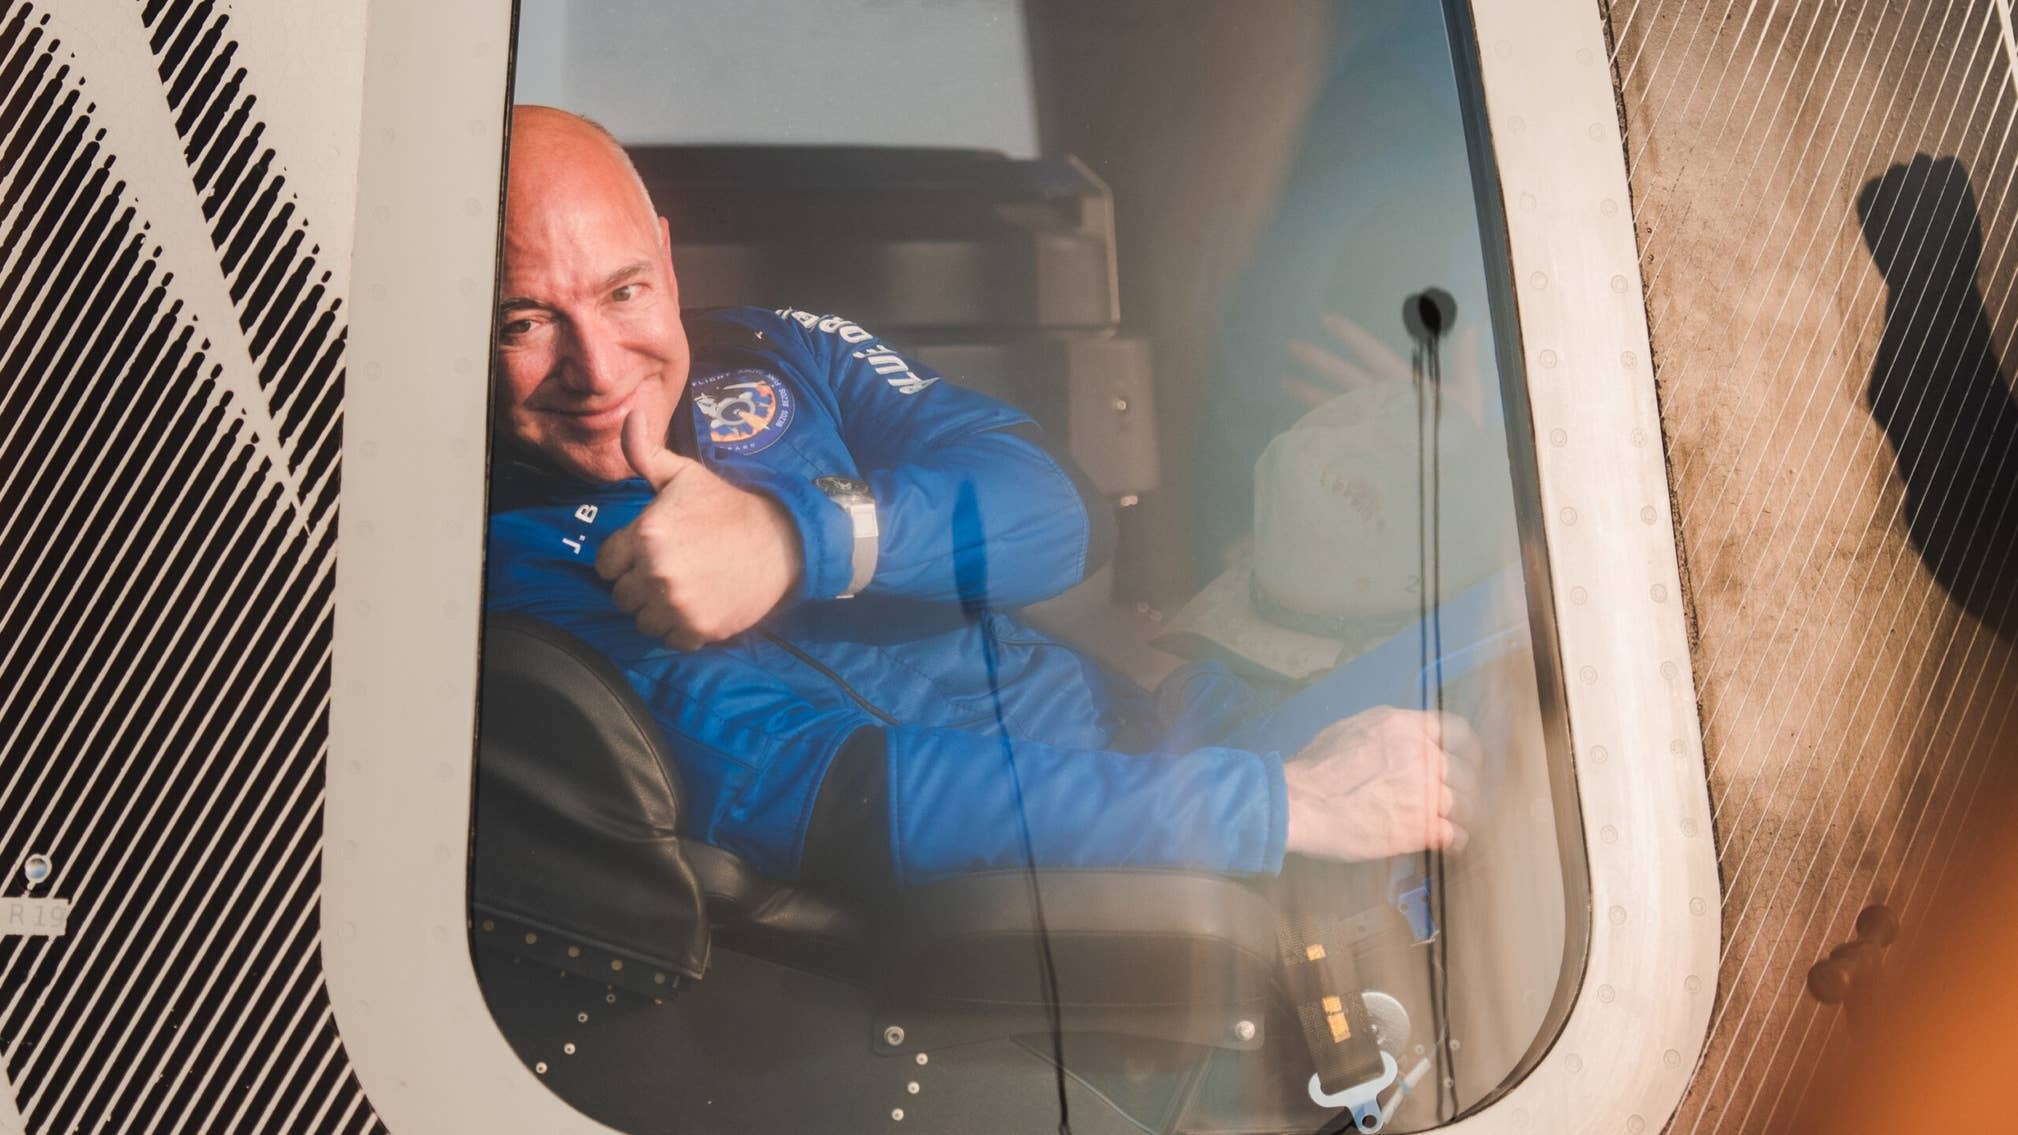 Blue Origin CEO Jeff Bezos (pictured) and SpaceX CEO Elon Musk are competing for dominance of the commercial spaceflight industry. Credit: Blue Origin.